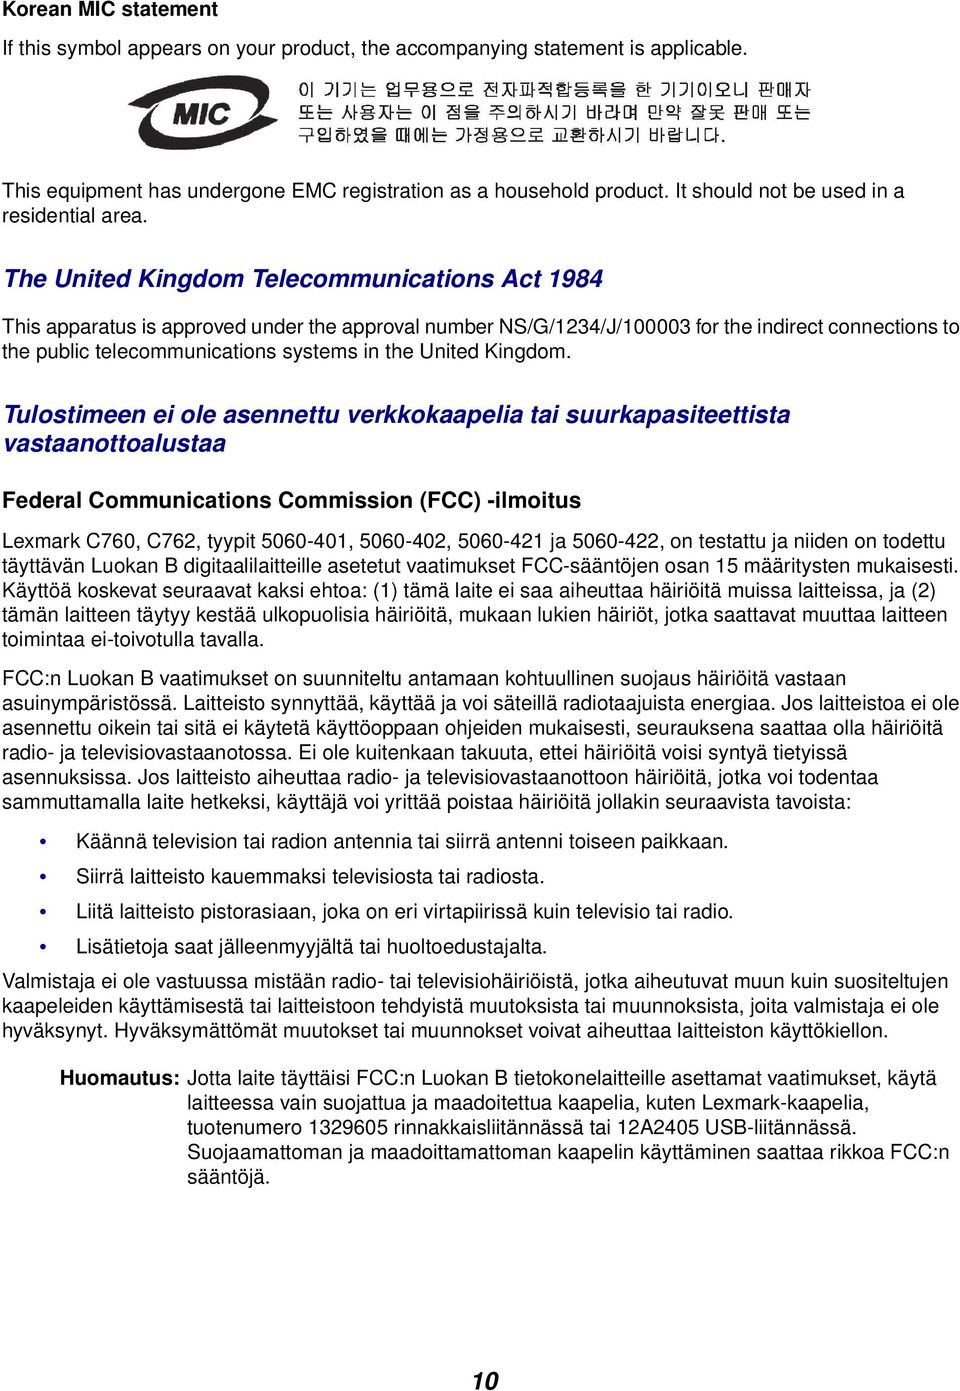 The United Kingdom Telecommunications Act 1984 This apparatus is approved under the approval number NS/G/1234/J/100003 for the indirect connections to the public telecommunications systems in the